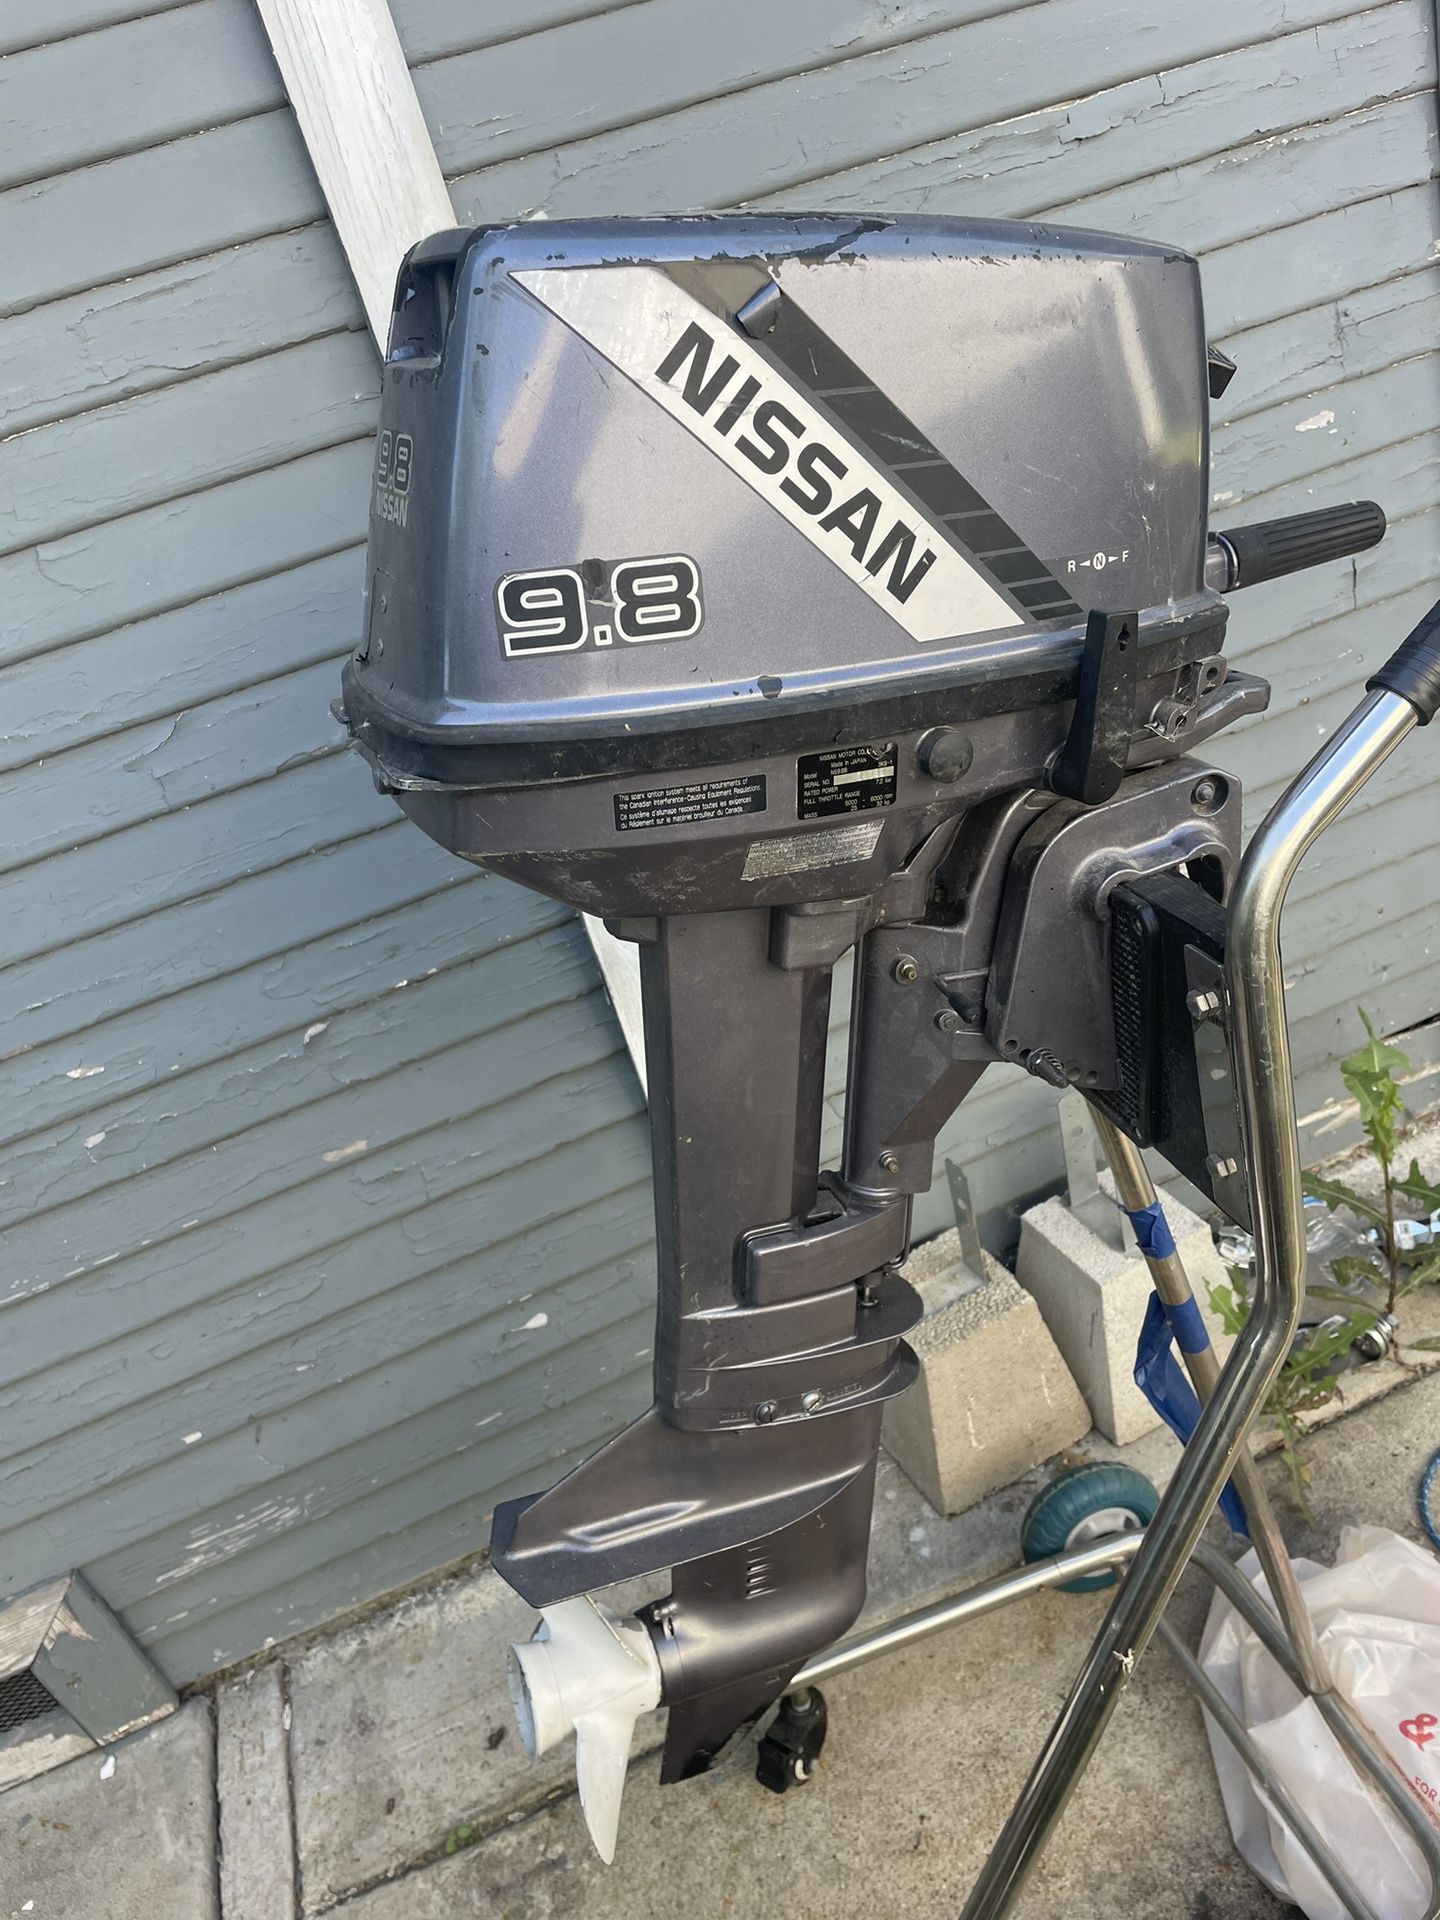 Nissan Outboard 9.8hp